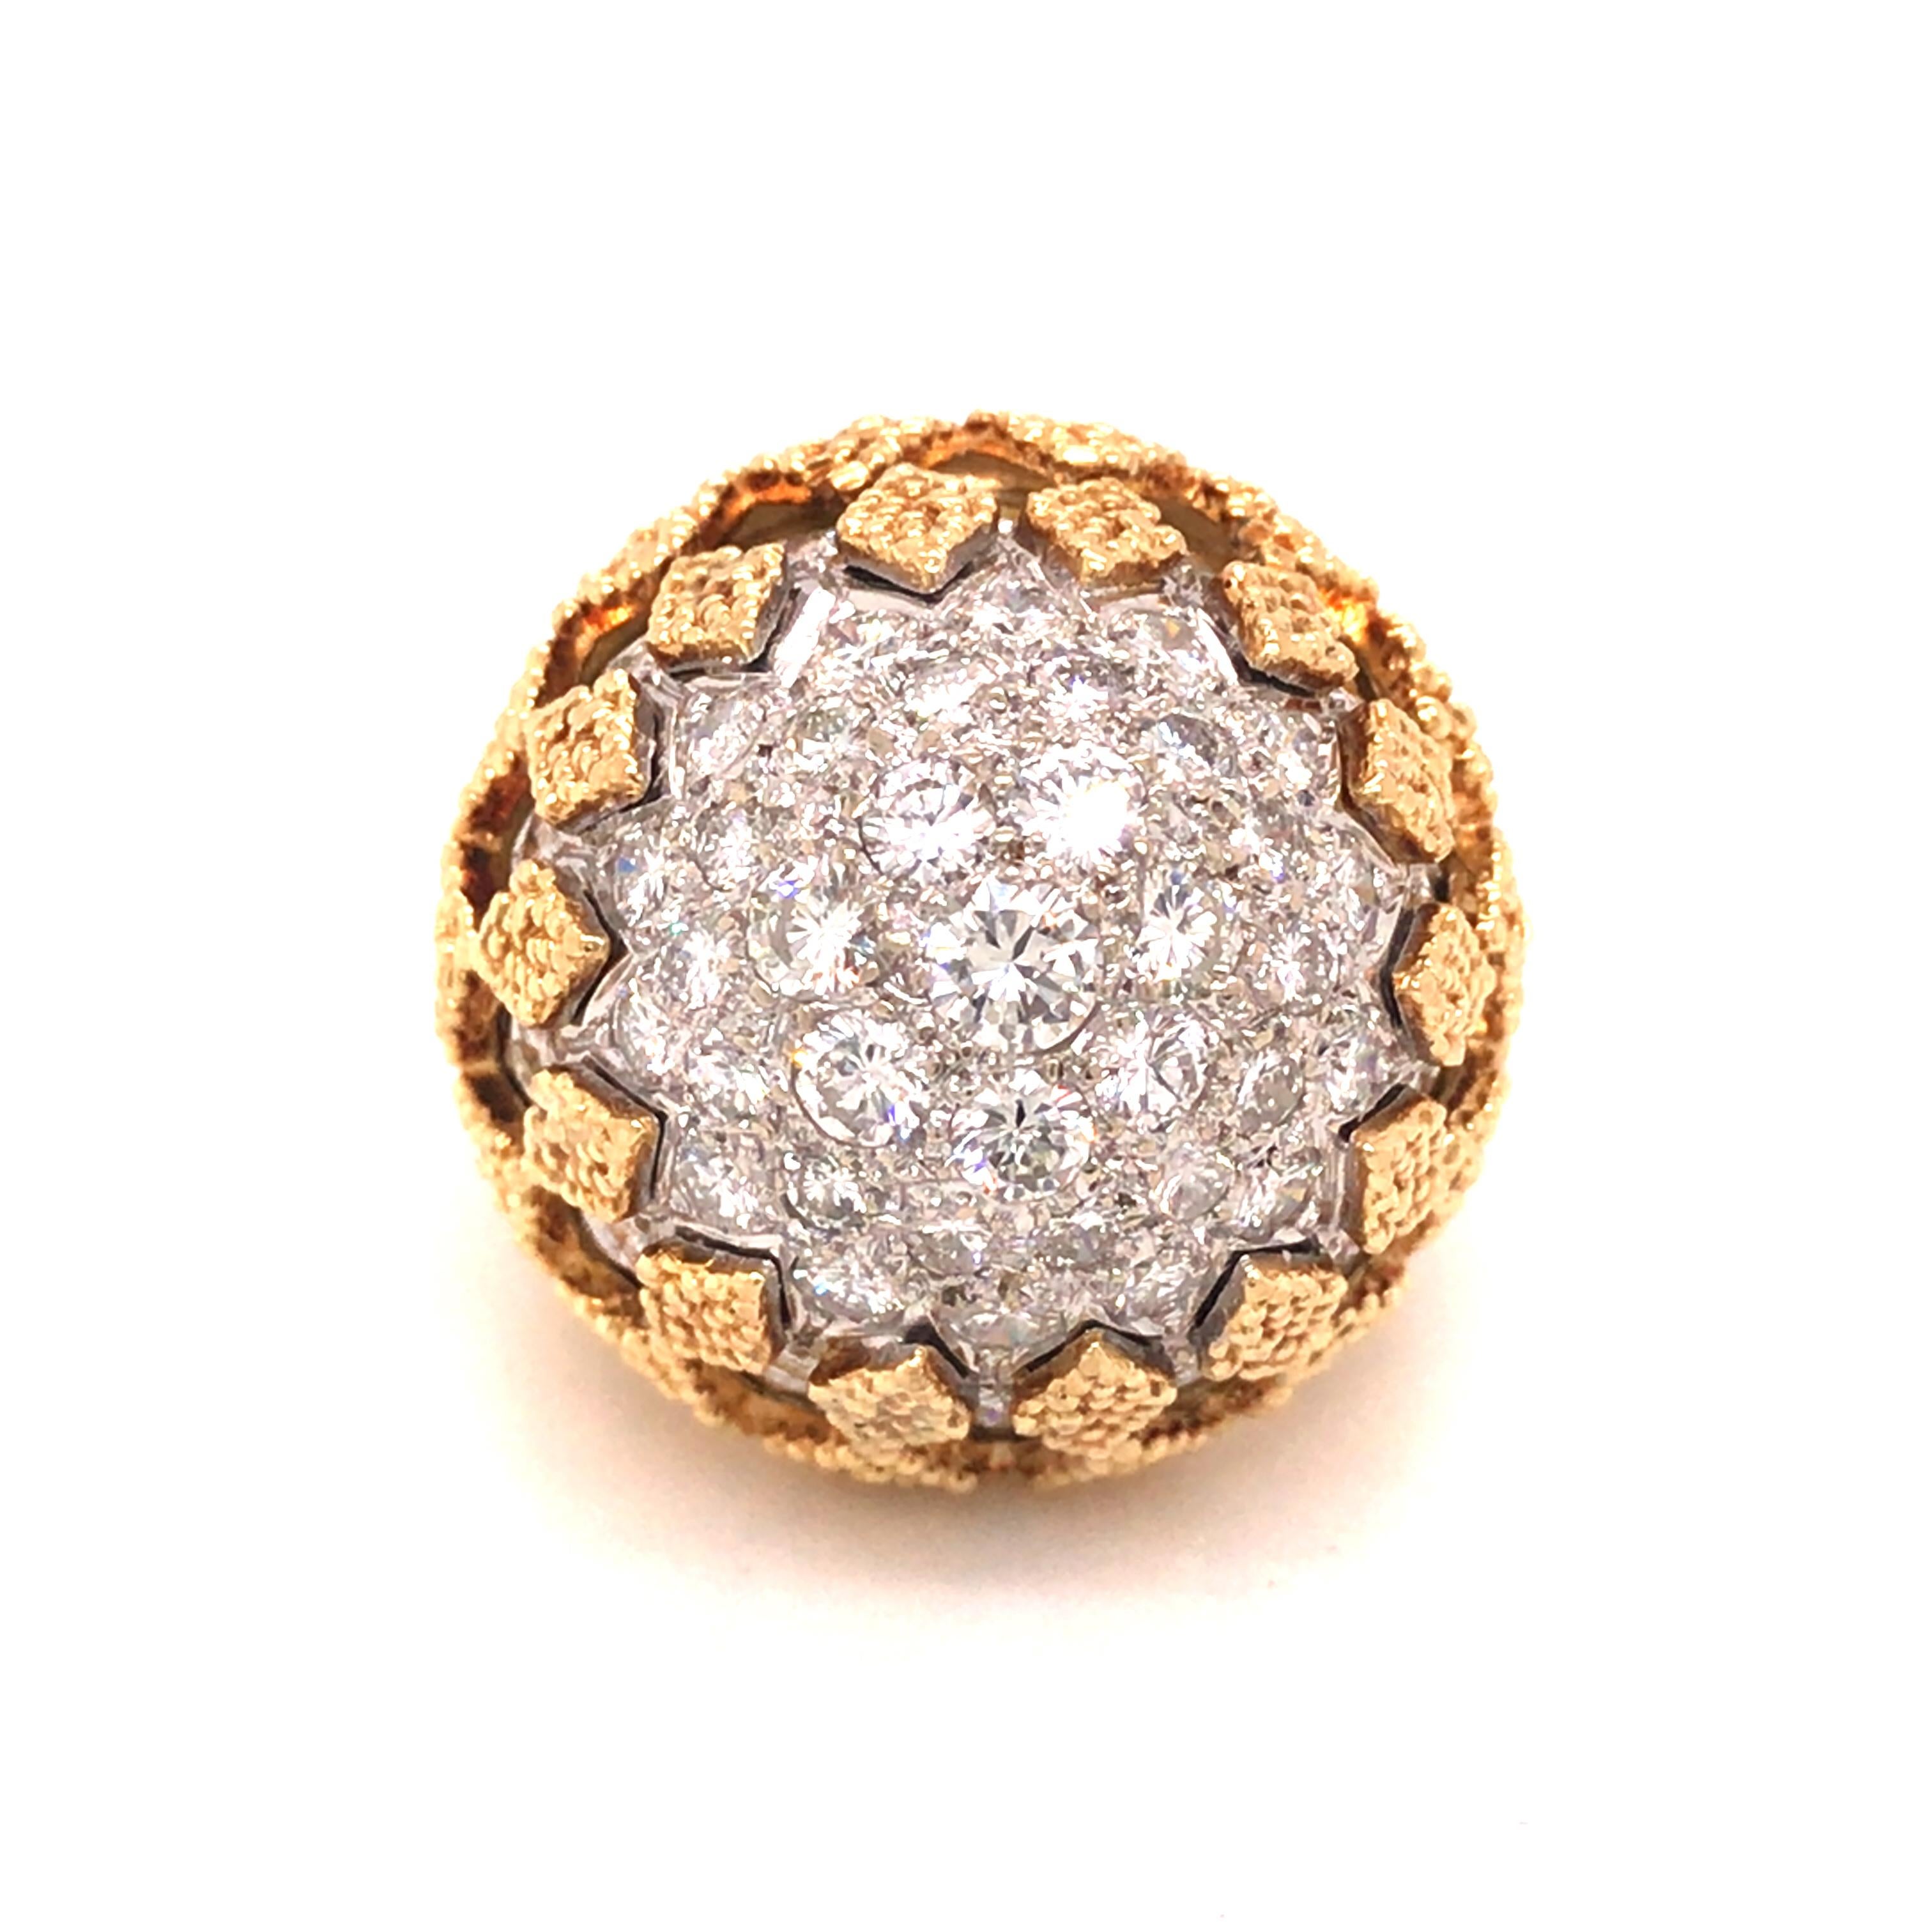 Diamond Pave Dome Ring in 18K Yellow Gold and Platinum.  Round Brilliant Cut Diamonds weighing 4.50 carat total weight, G-H in color and VS-SI in clarity are expertly set.  The Ring measures 1 inch in length and width and 1/2 inch in height. Ring